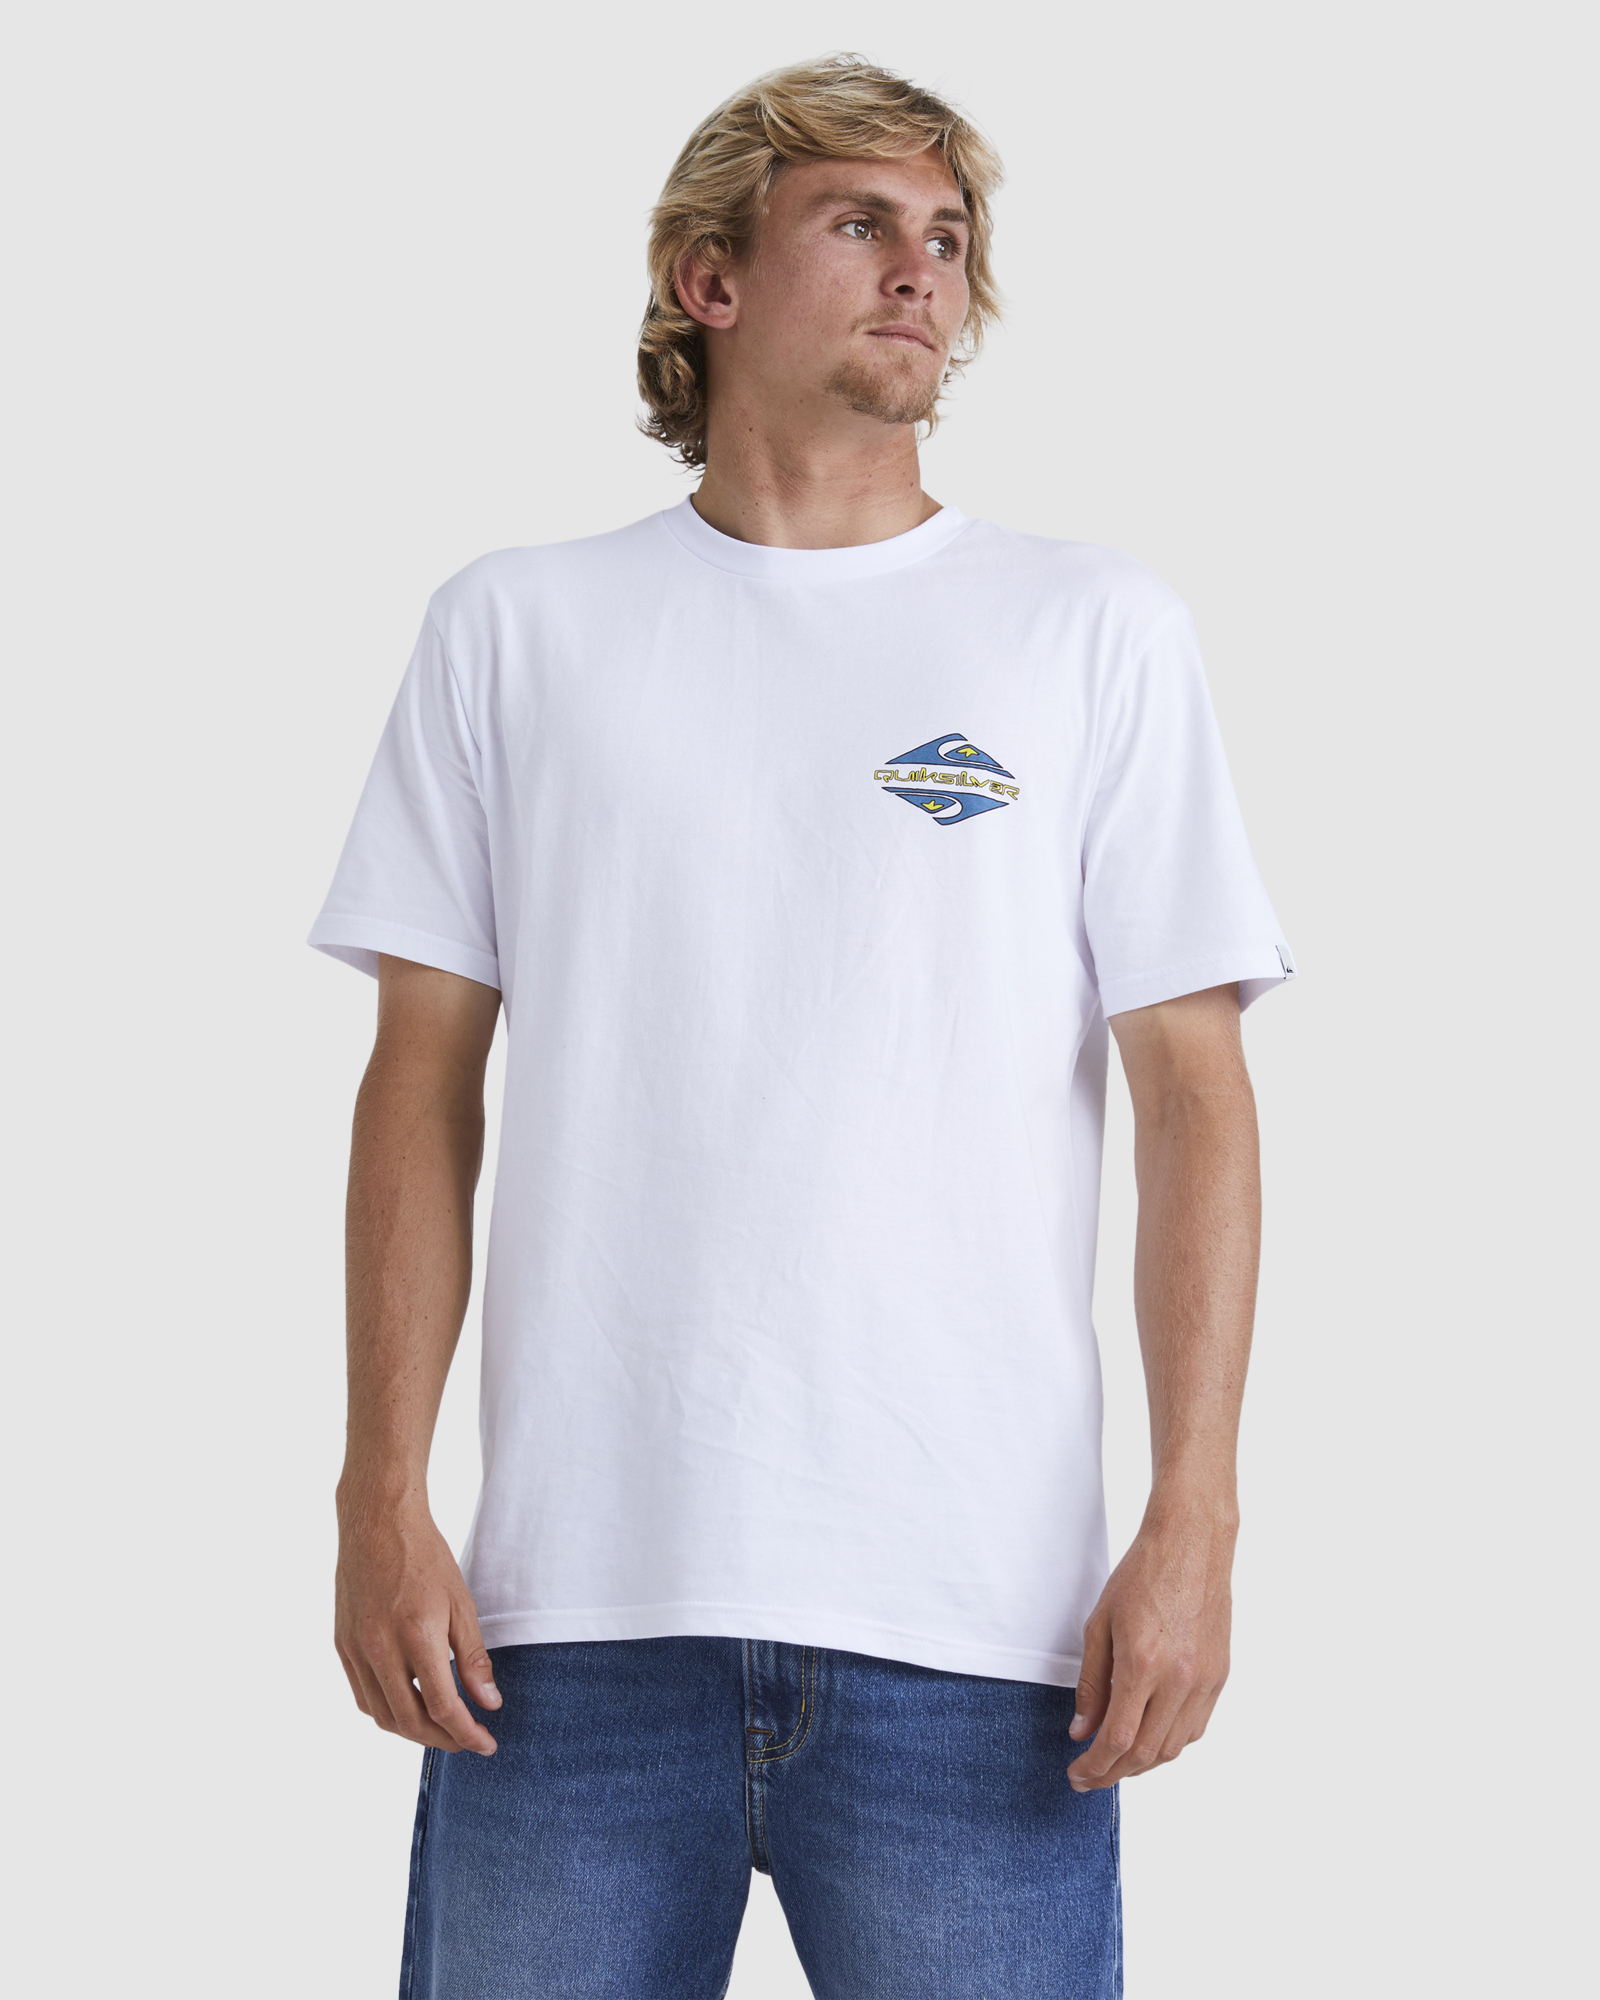 Quiksilver Mens Flaming Diamond Tee - White | SurfStitch